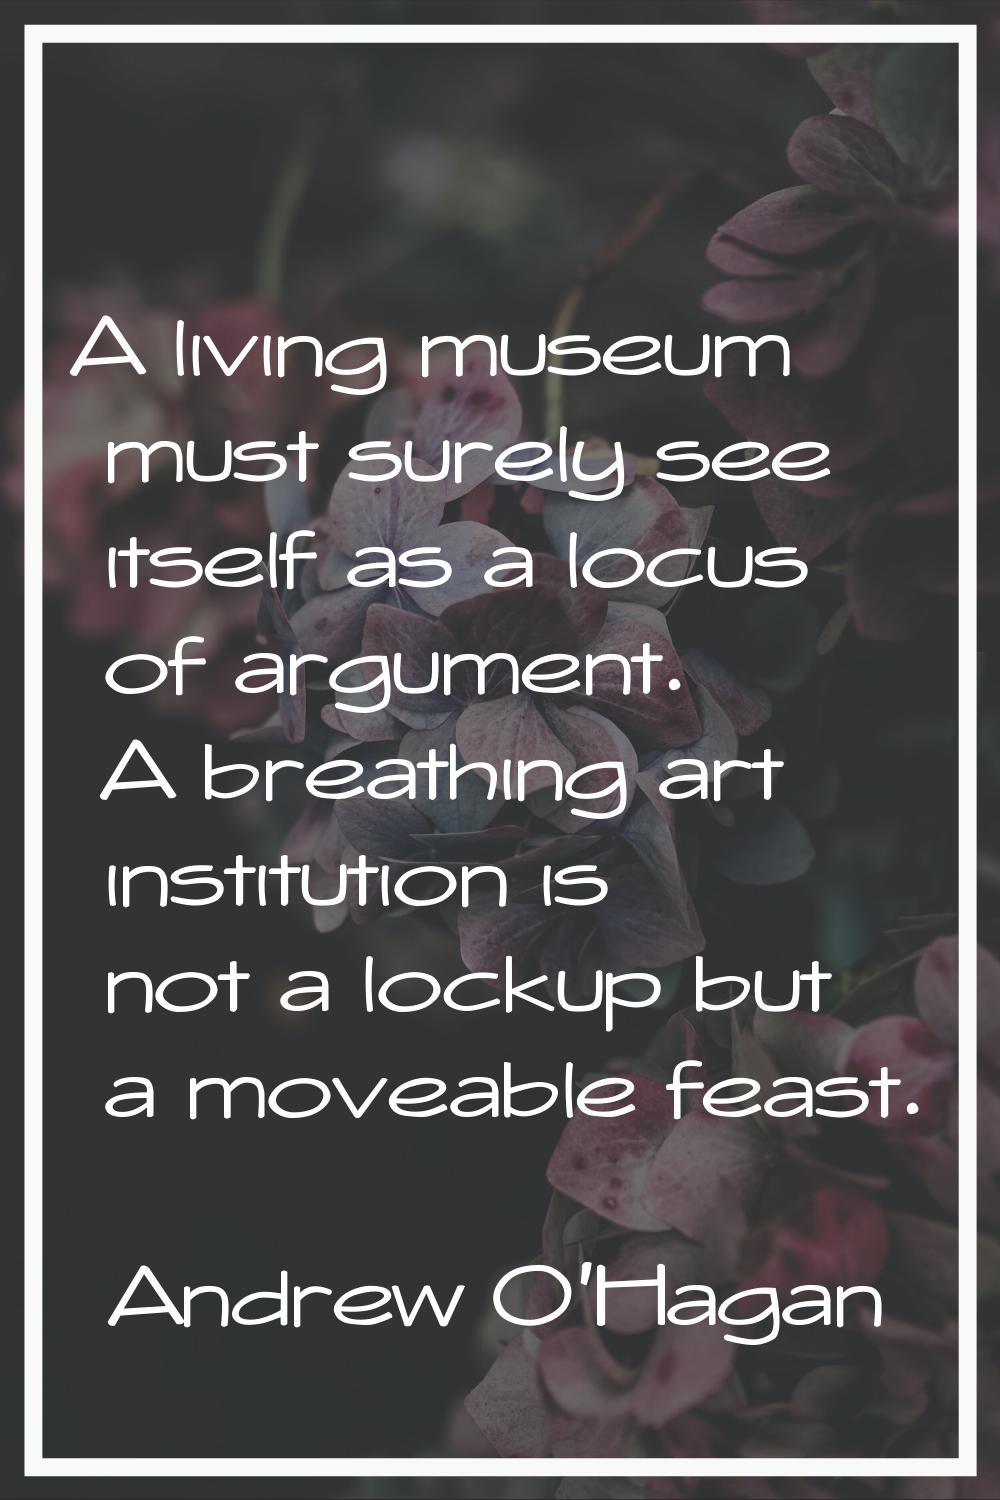 A living museum must surely see itself as a locus of argument. A breathing art institution is not a